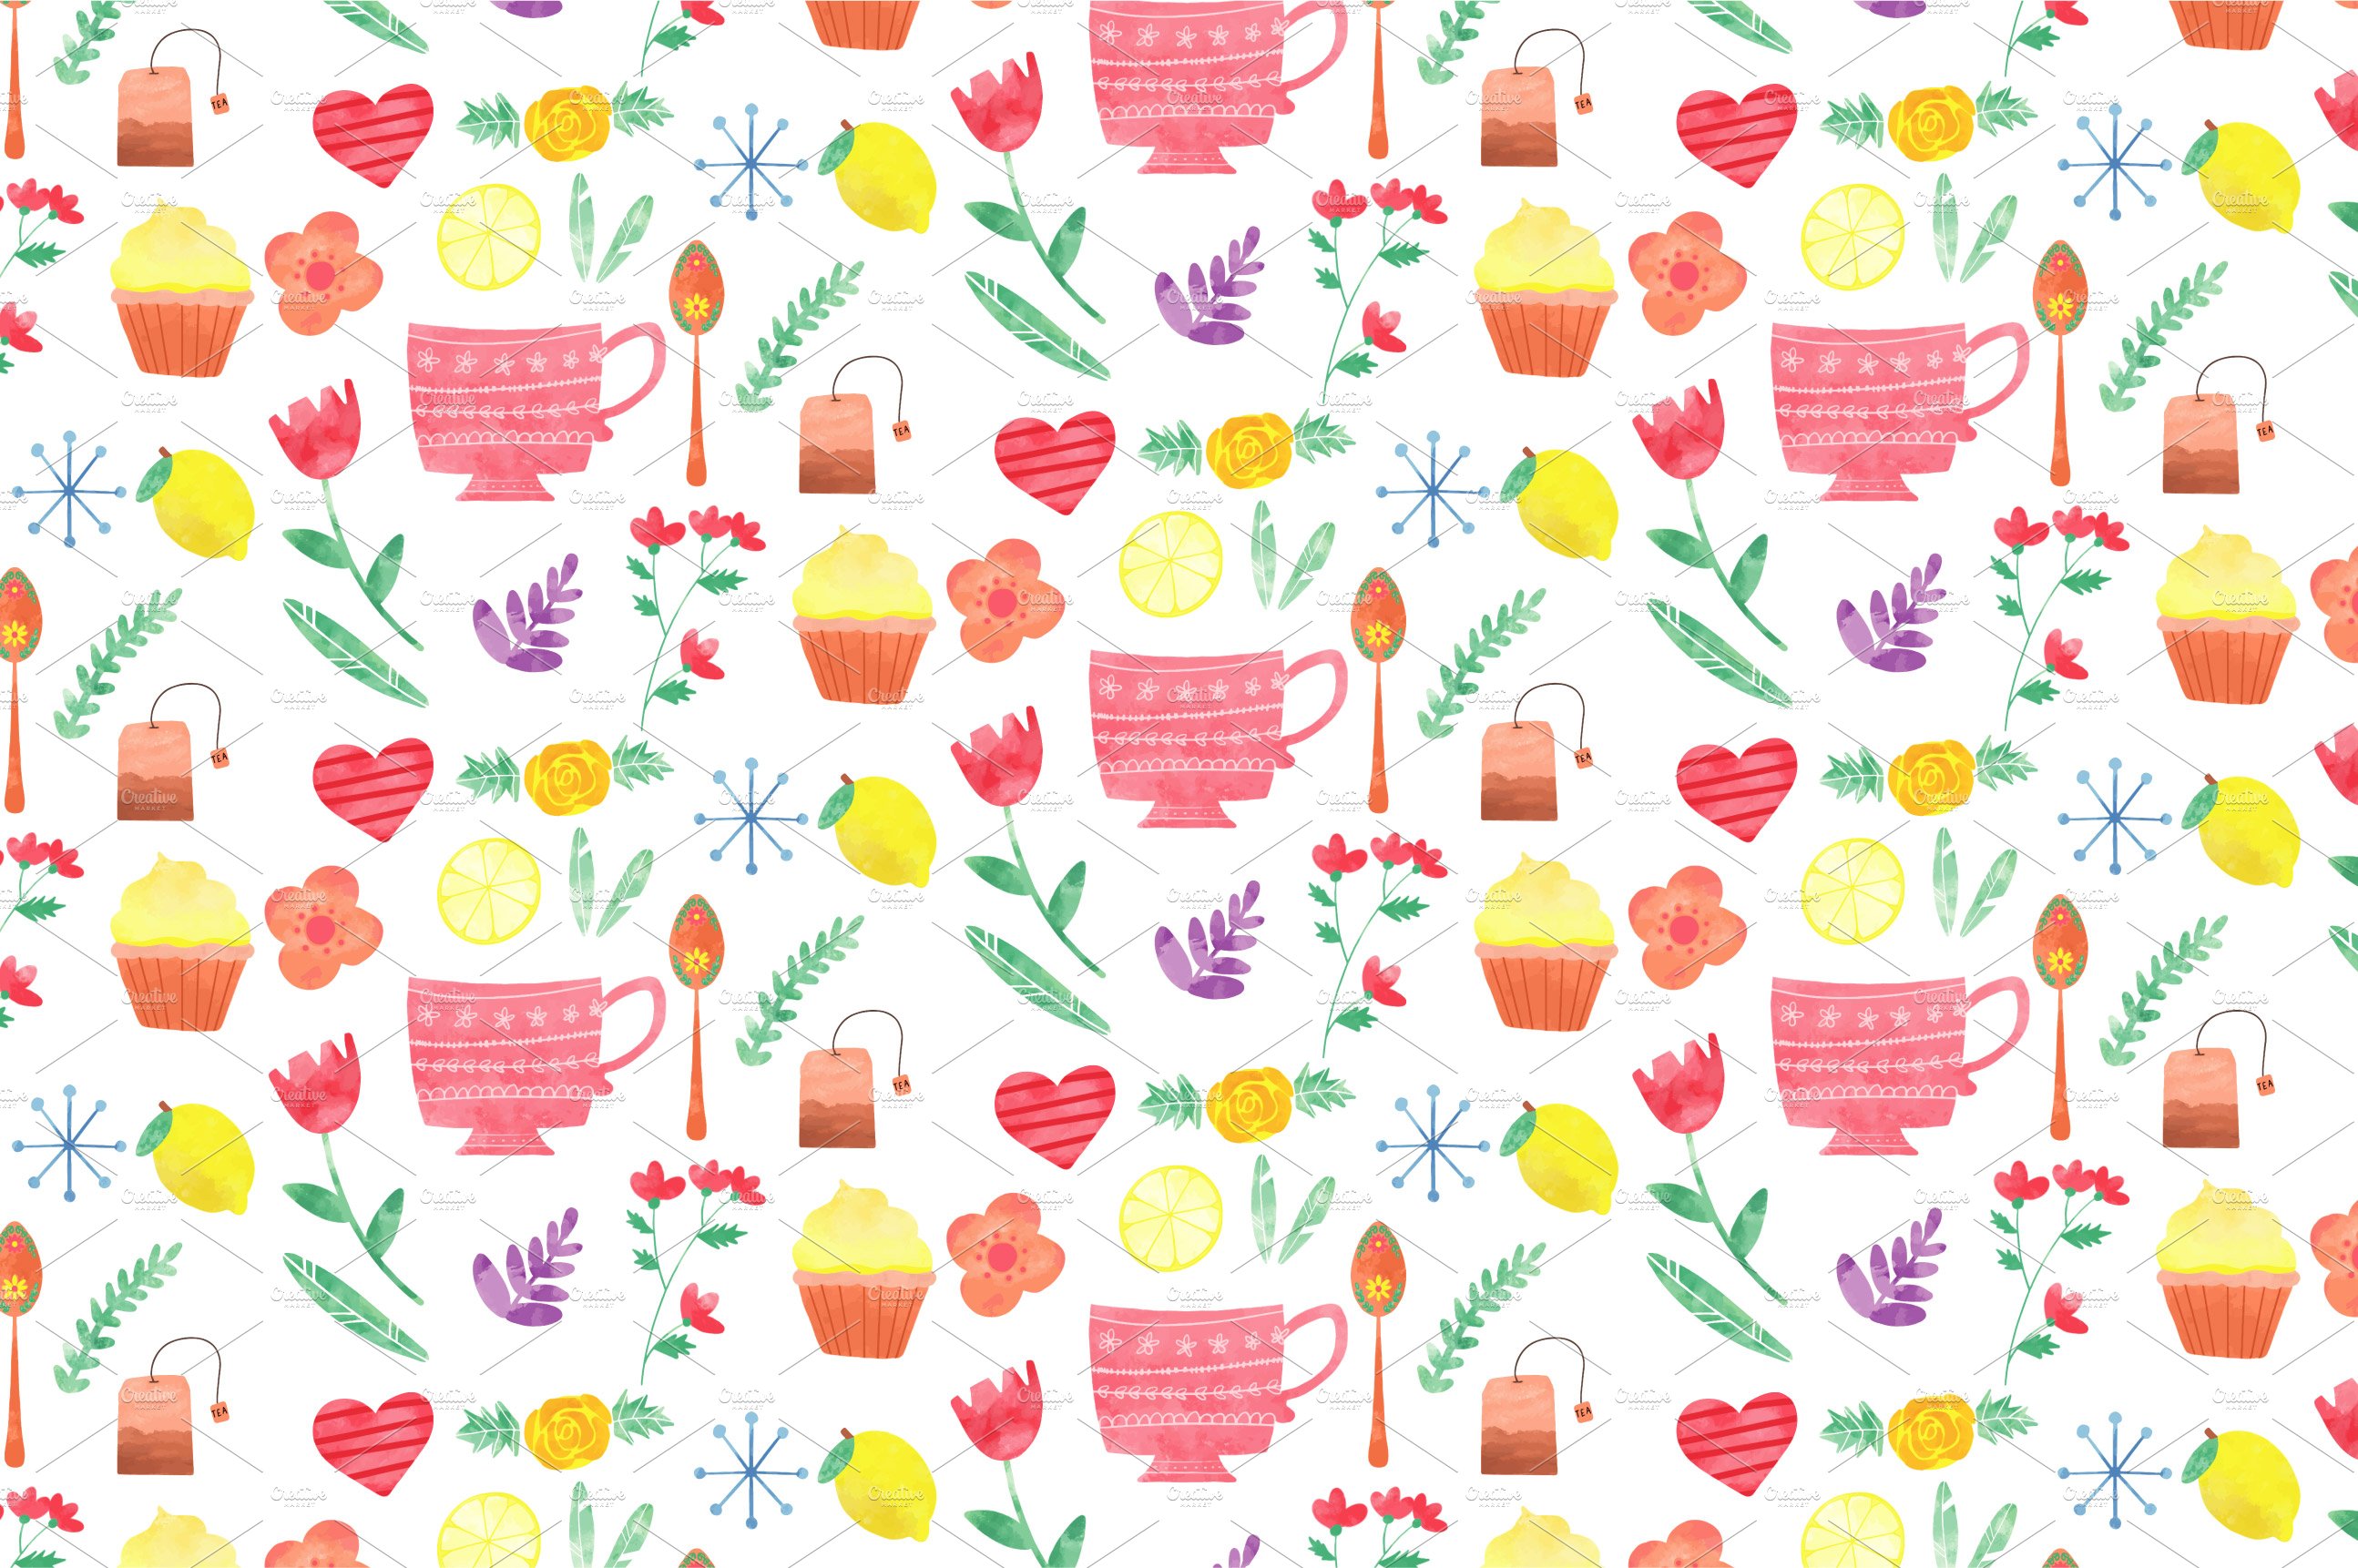 Summer Time Tea Seamless Pattern cover image.